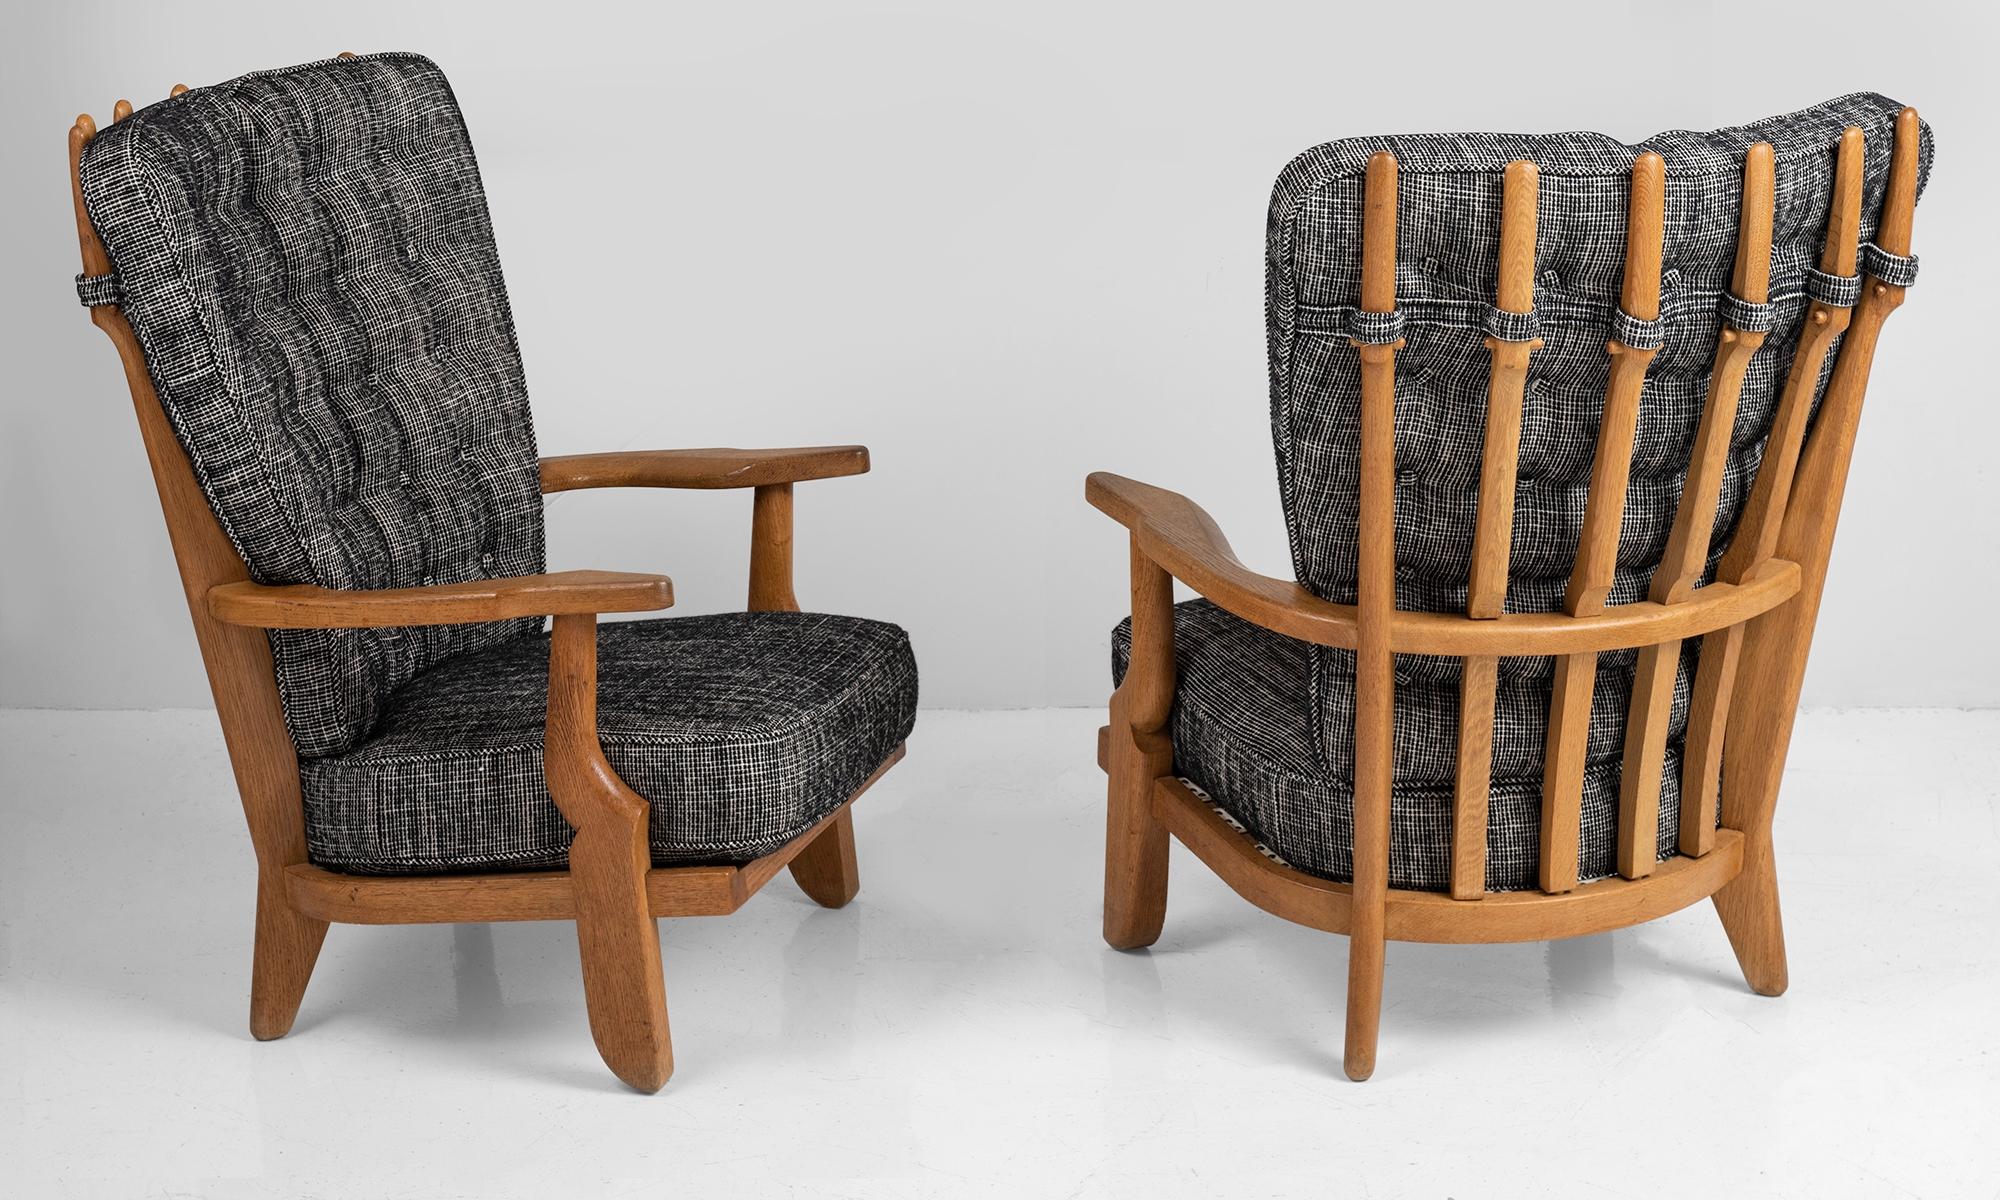 Armchairs by Guillerme et Chambron, France, circa 1950
Carved oak frame with upholstered seat and back.
